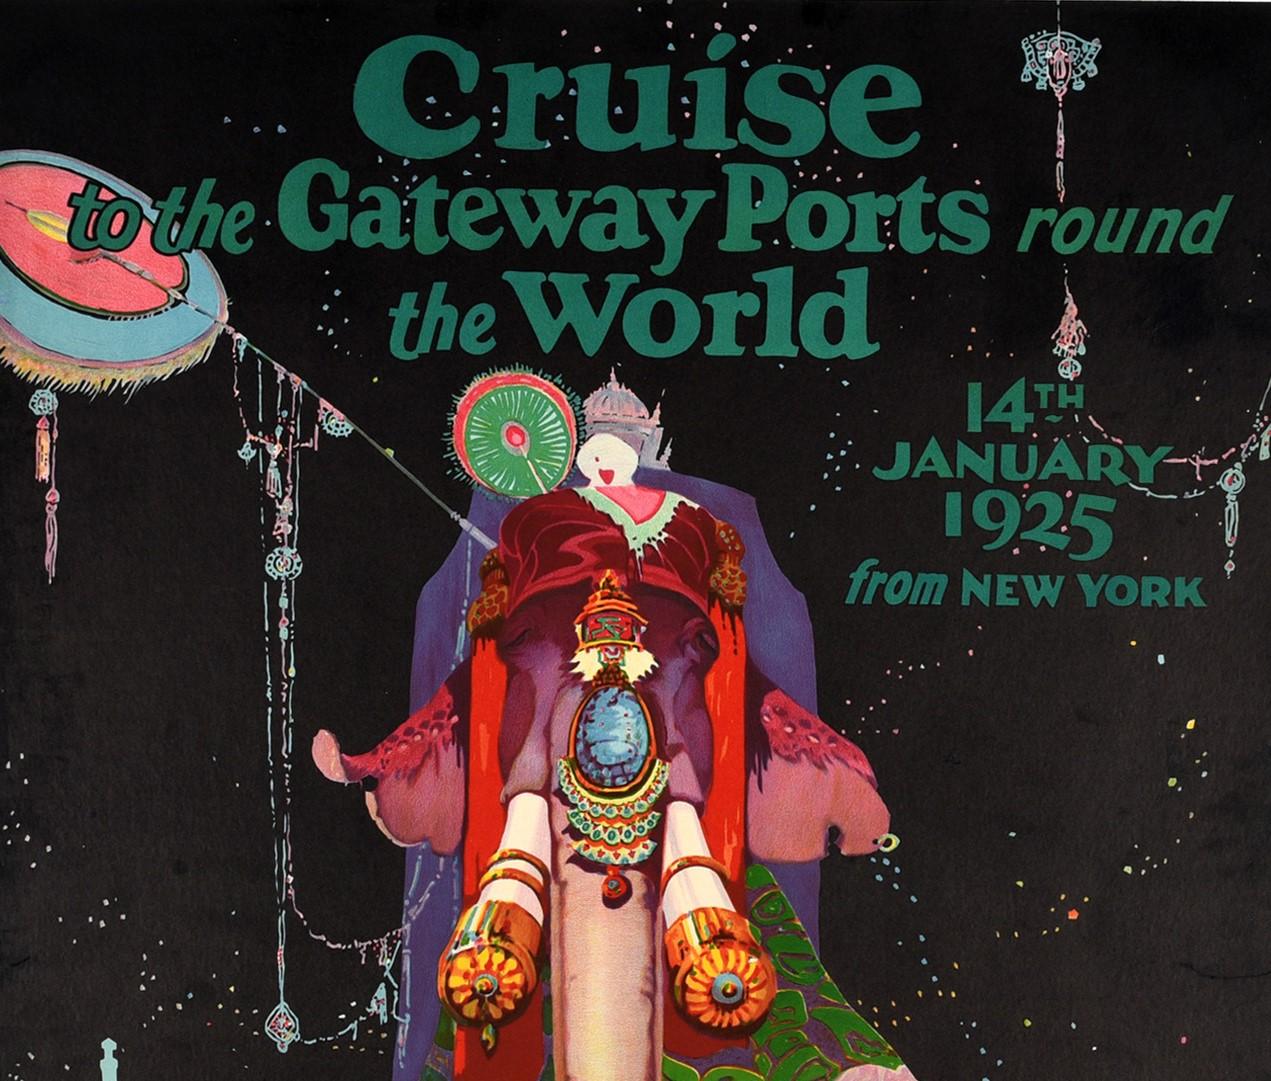 Original vintage travel advertising poster for Canadian Pacific S.S. Empress of France Cruise to the Gateway Ports round the World 14th January 1925 from New York featuring great artwork featuring a decorated Indian elephant in colourful patterns